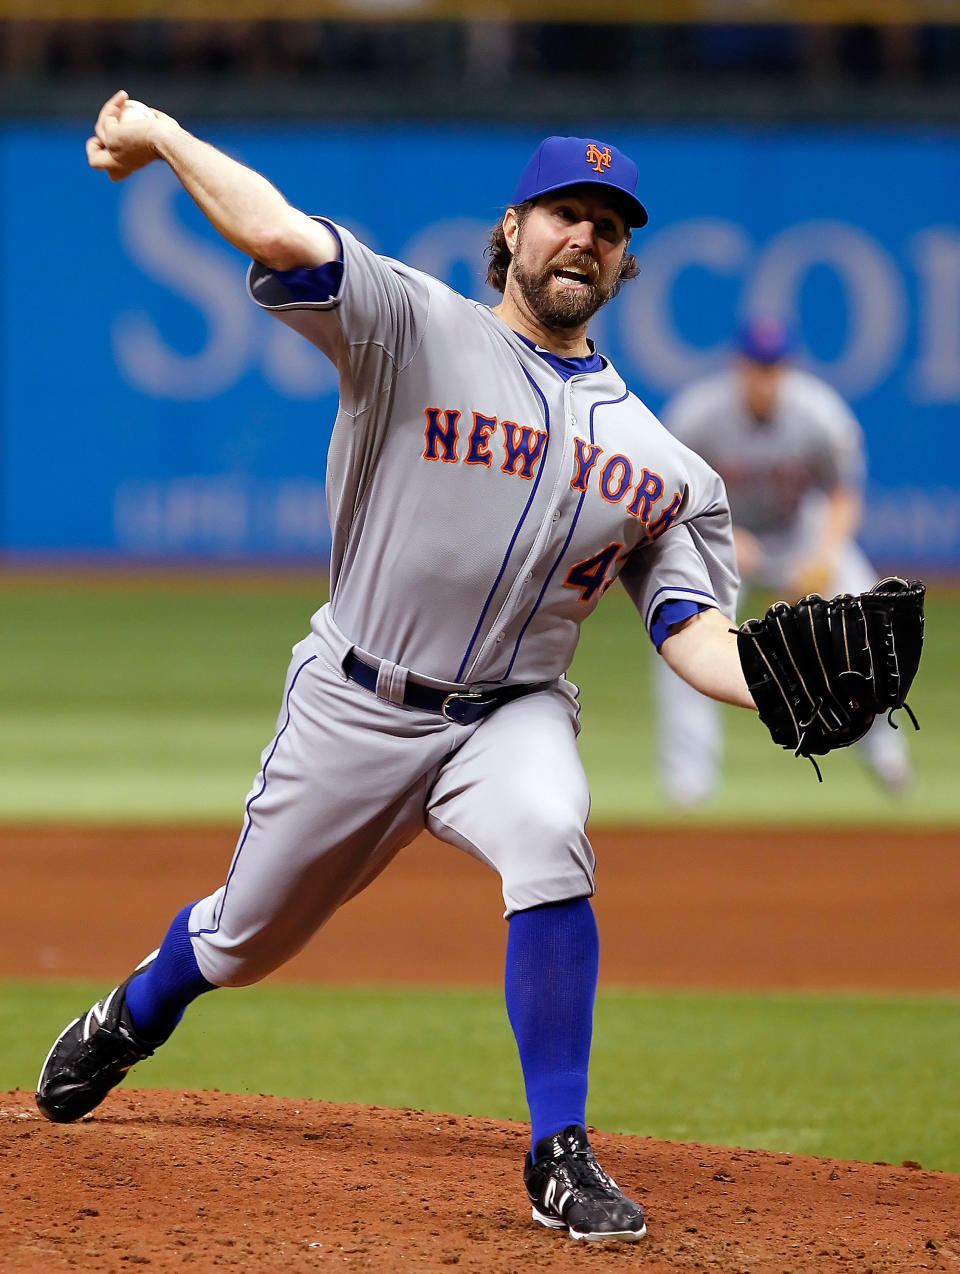 ST. PETERSBURG, FL - JUNE 13: Pitcher R.A. Dickey #43 of the New York Mets pitches against the Tampa Bay Rays during the game at Tropicana Field on June 13, 2012 in St. Petersburg, Florida. (Photo by J. Meric/Getty Images)